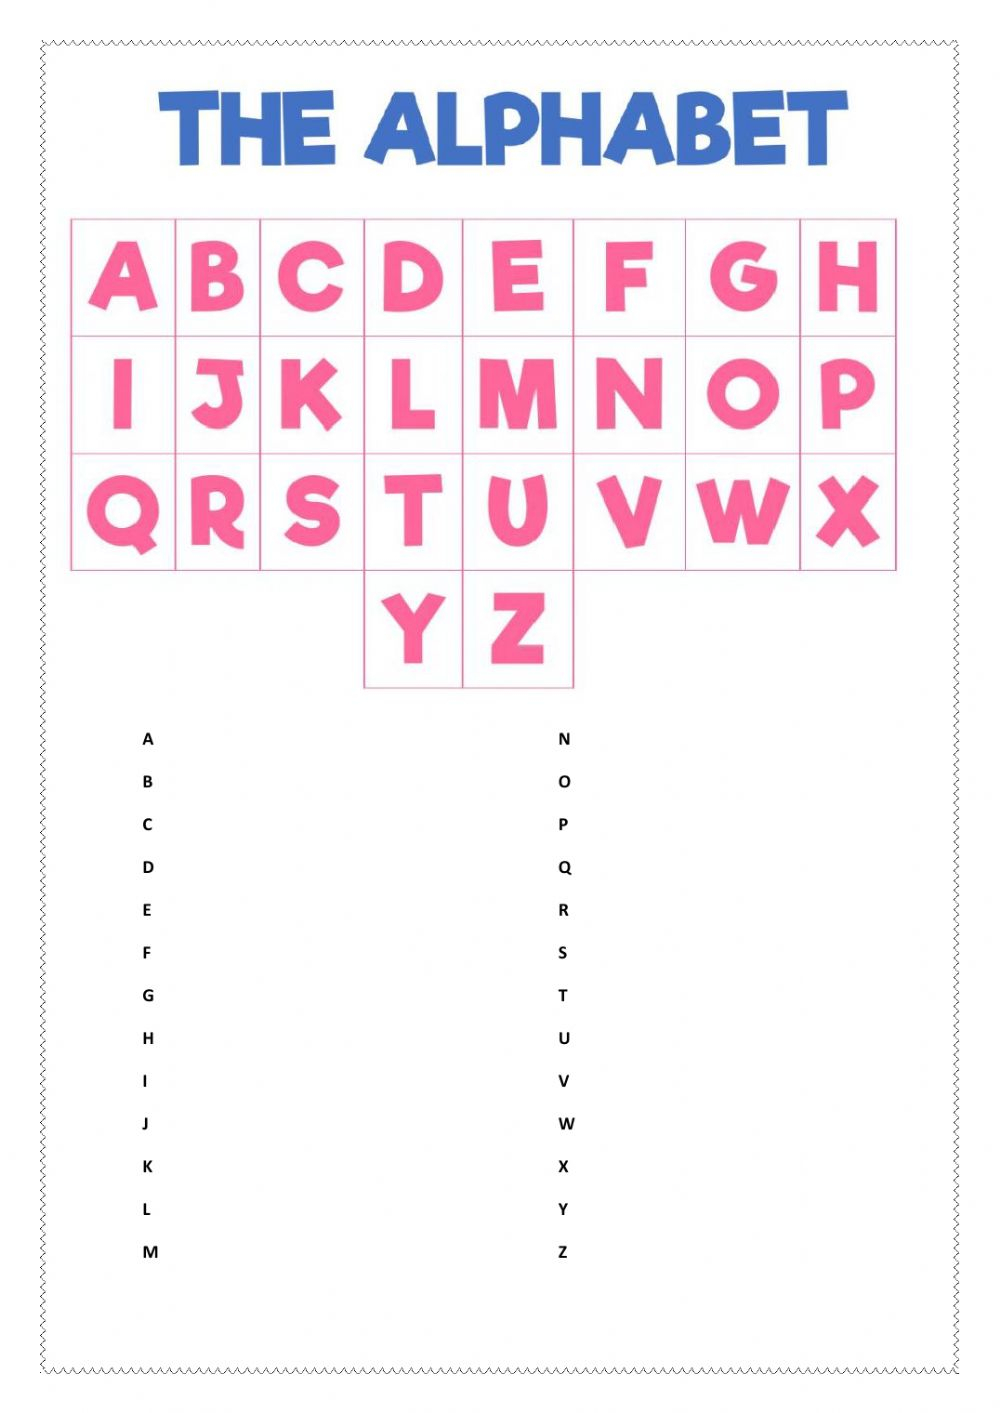 The Alphabet Game - Interactive Worksheet with Alphabet Game Worksheets